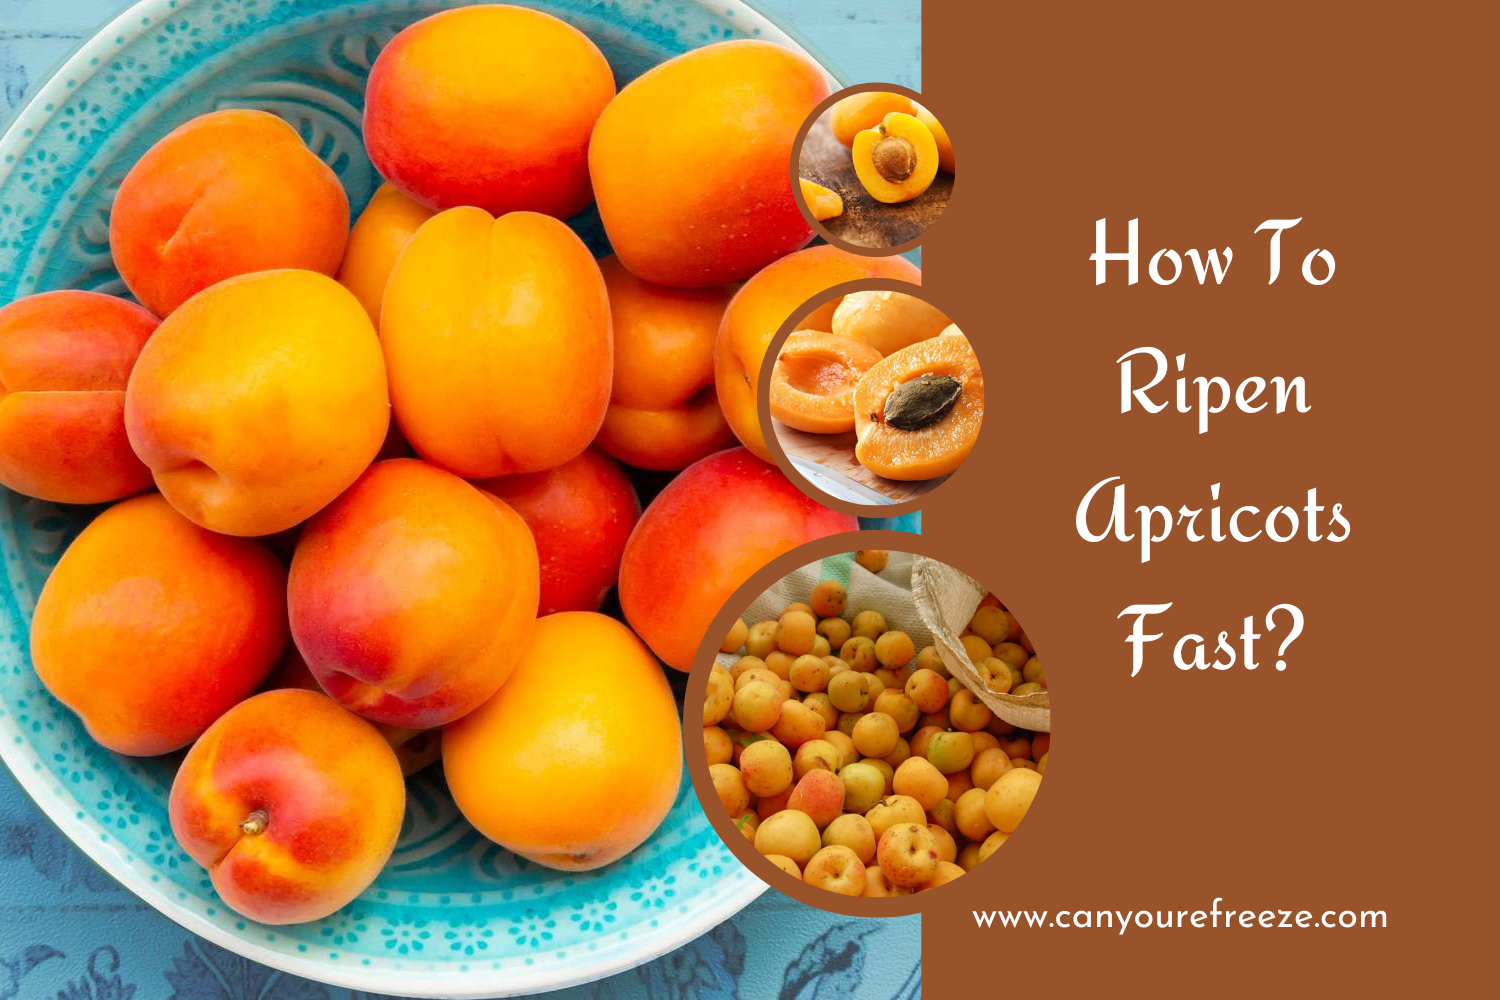 How To Ripen Apricots Fast